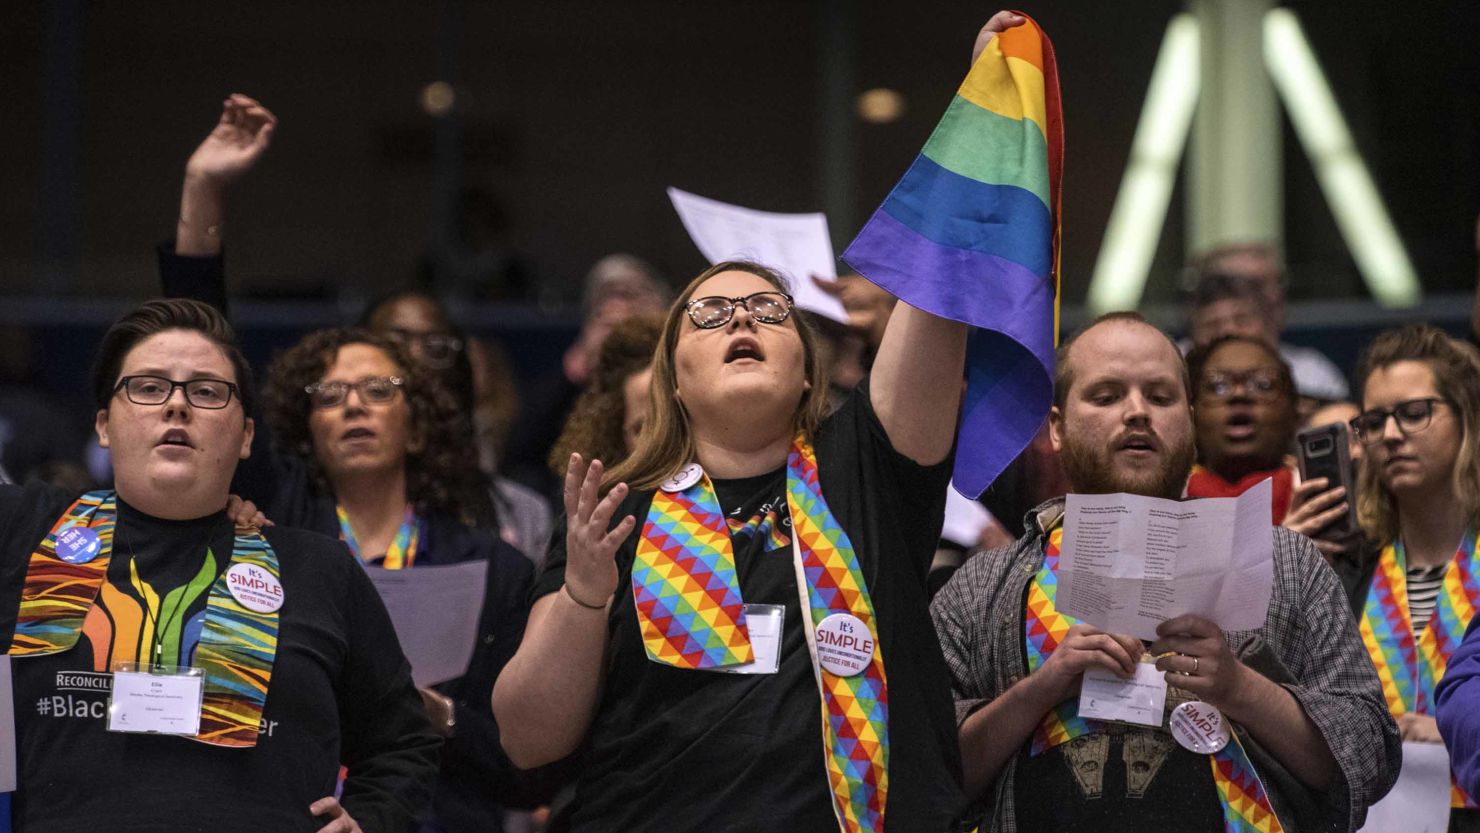 Shelby Ruch-Teegarden, center, of Garrett-Evangelical Theological Seminary joins other protestors during the United Methodist Church's special session of the General Conference in St. Louis, in February.